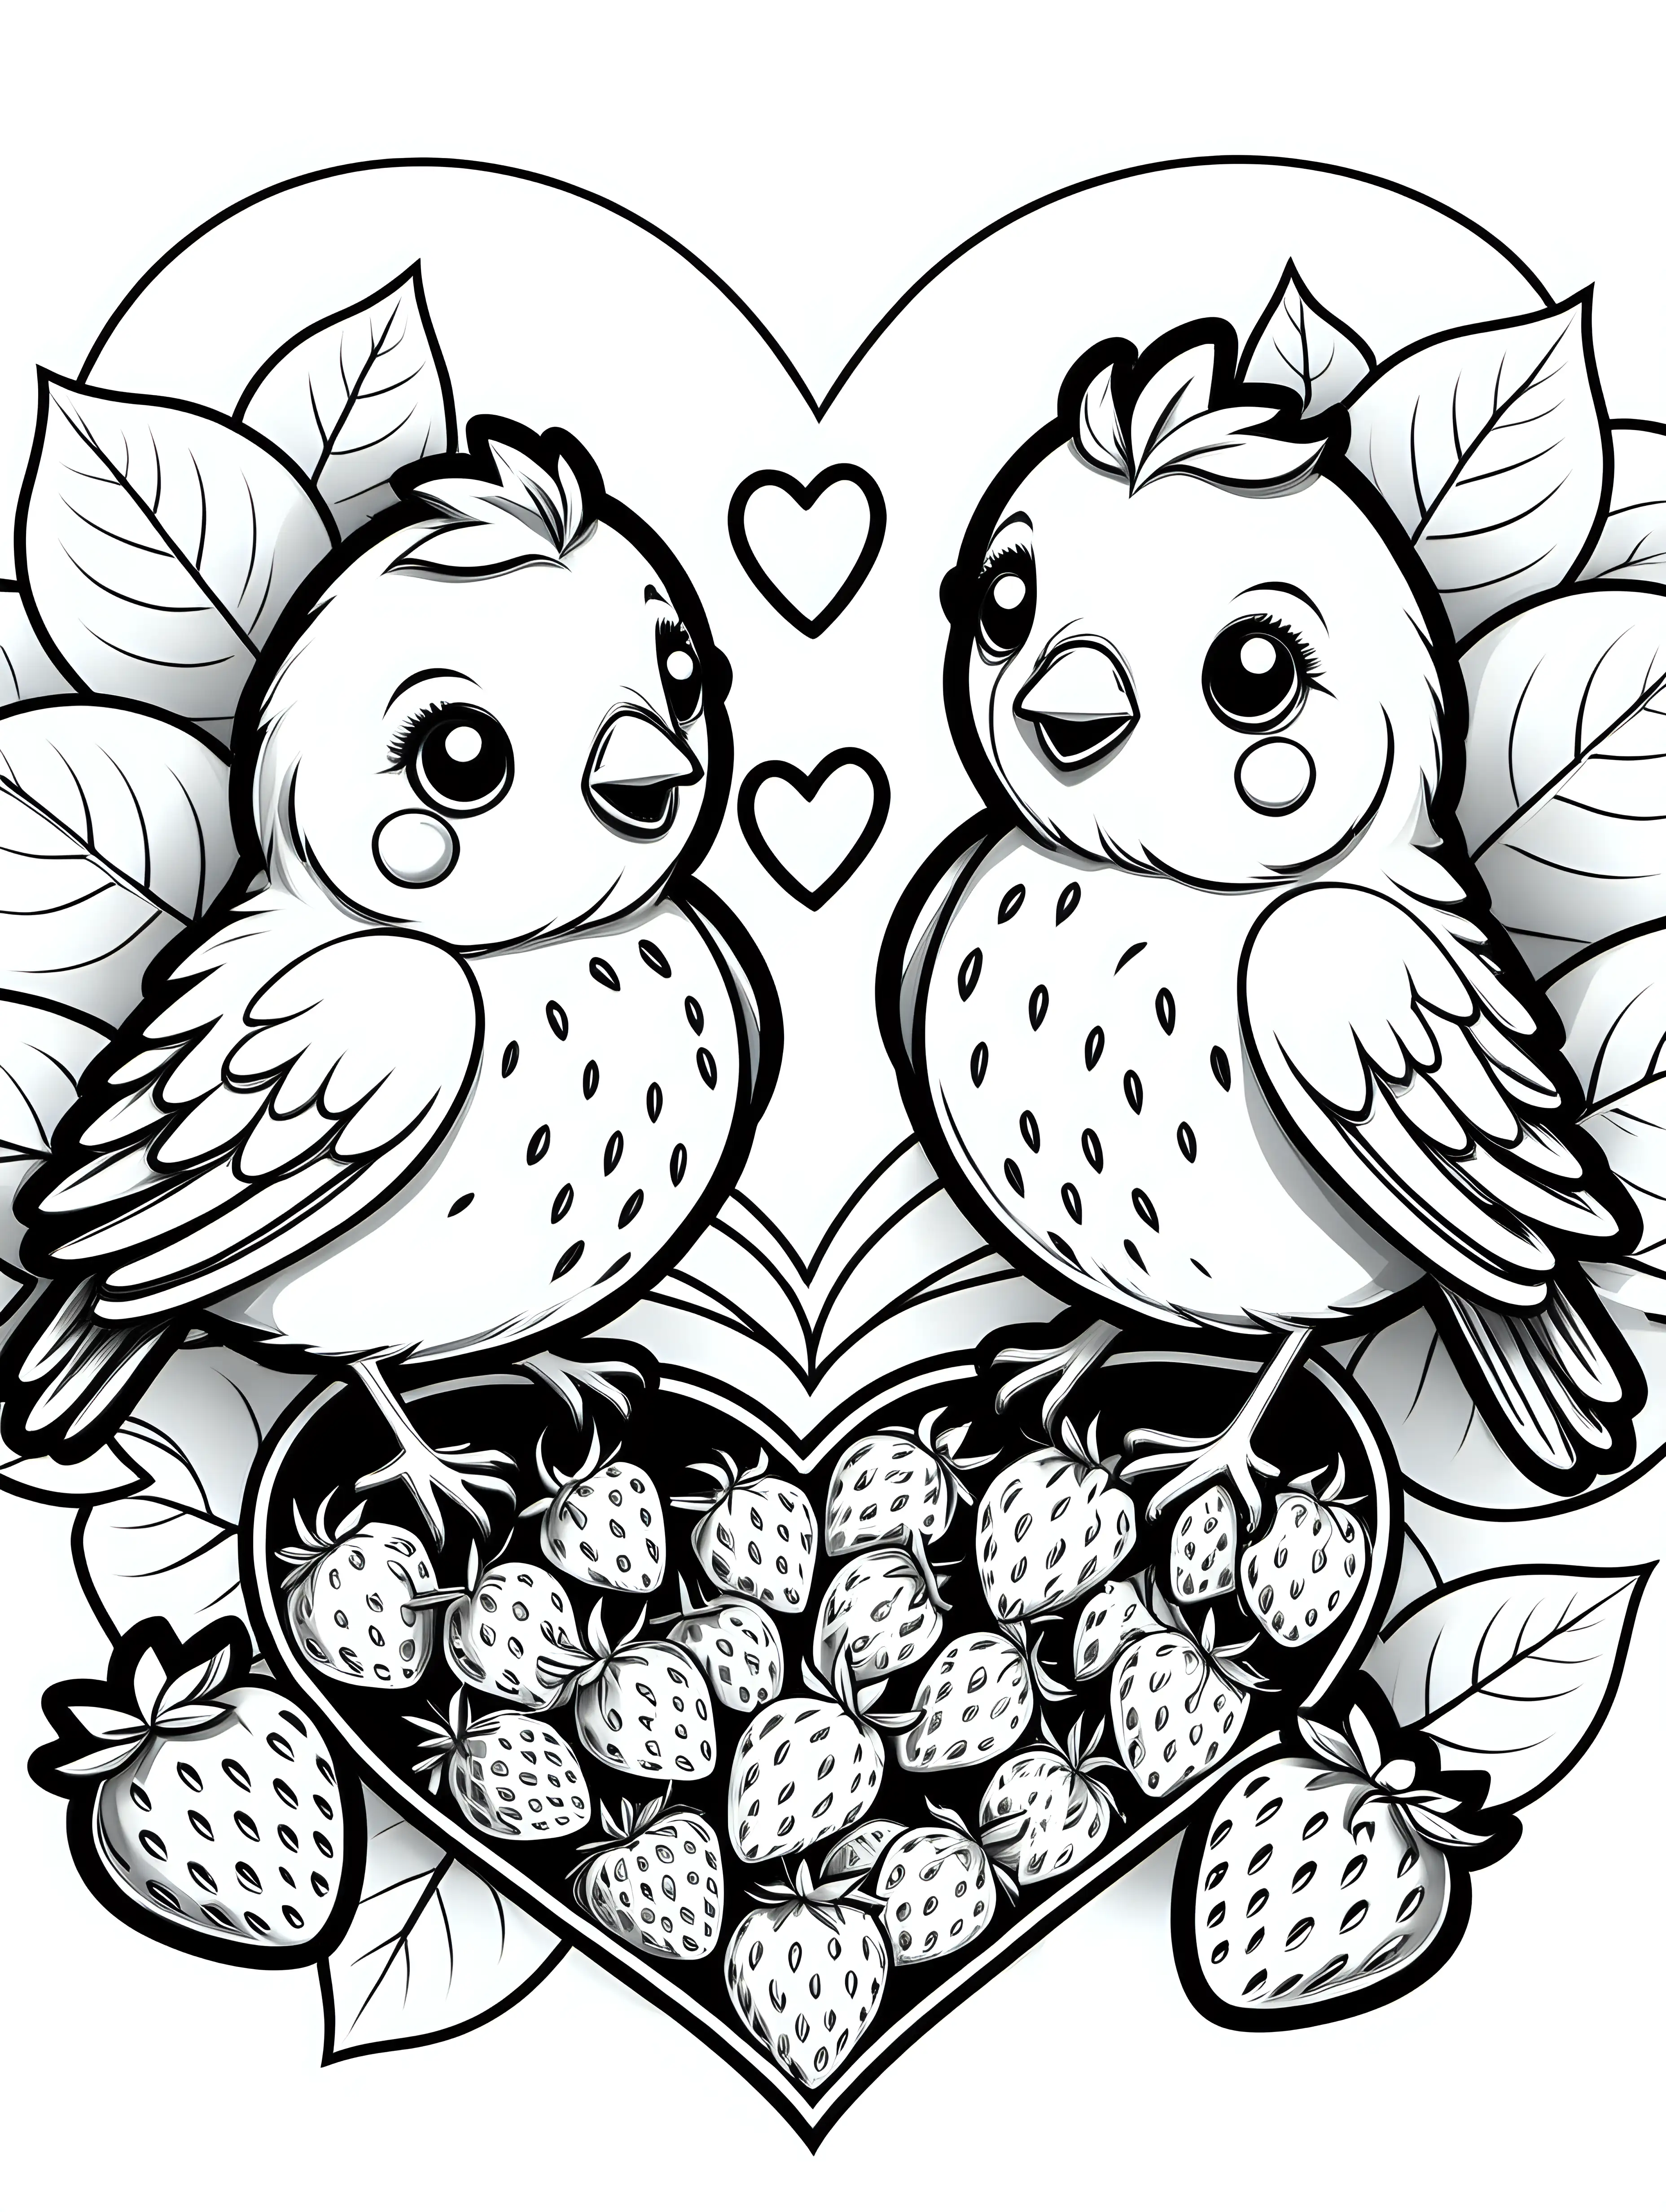 create a black line detailed sketch illustration coloring page of cute birds eating heart-shaped strawberries, crisp black outlines, no shading
